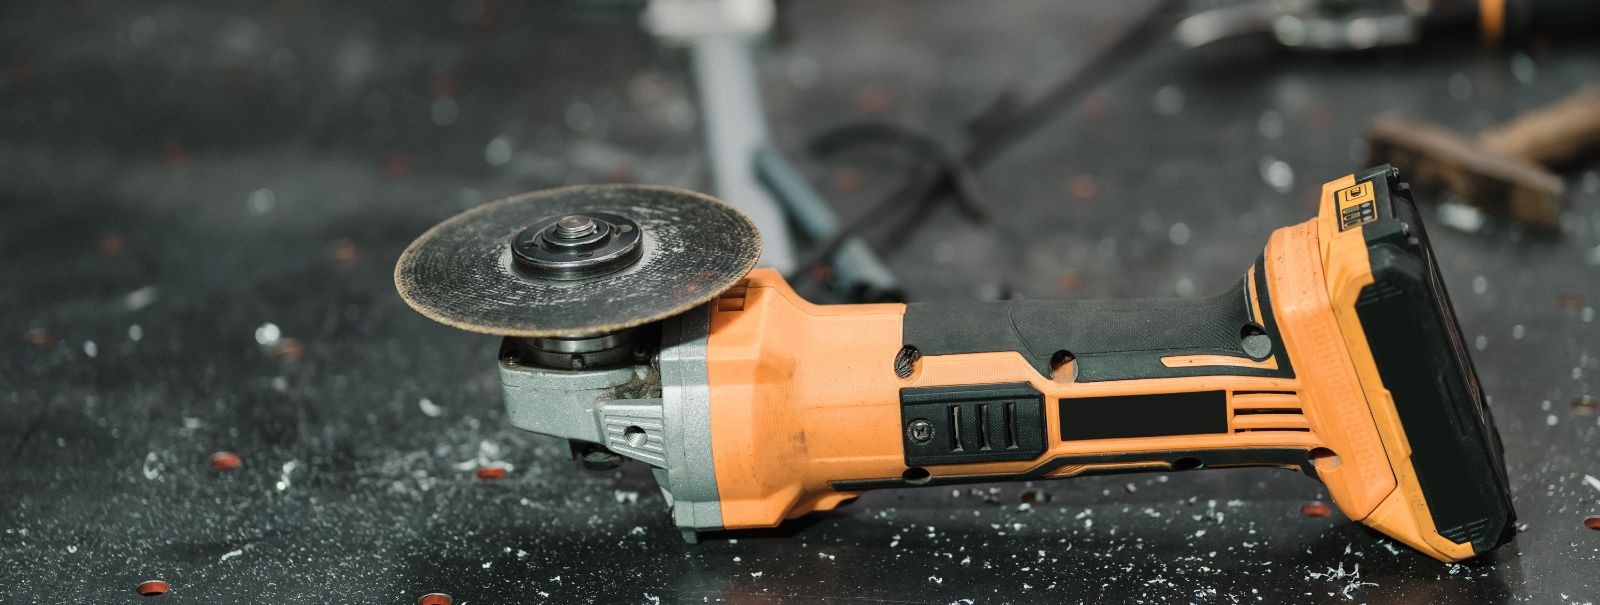 The construction industry has witnessed a significant shift with the advent of battery-powered tools. From the days of manual labor to the current era of cordle